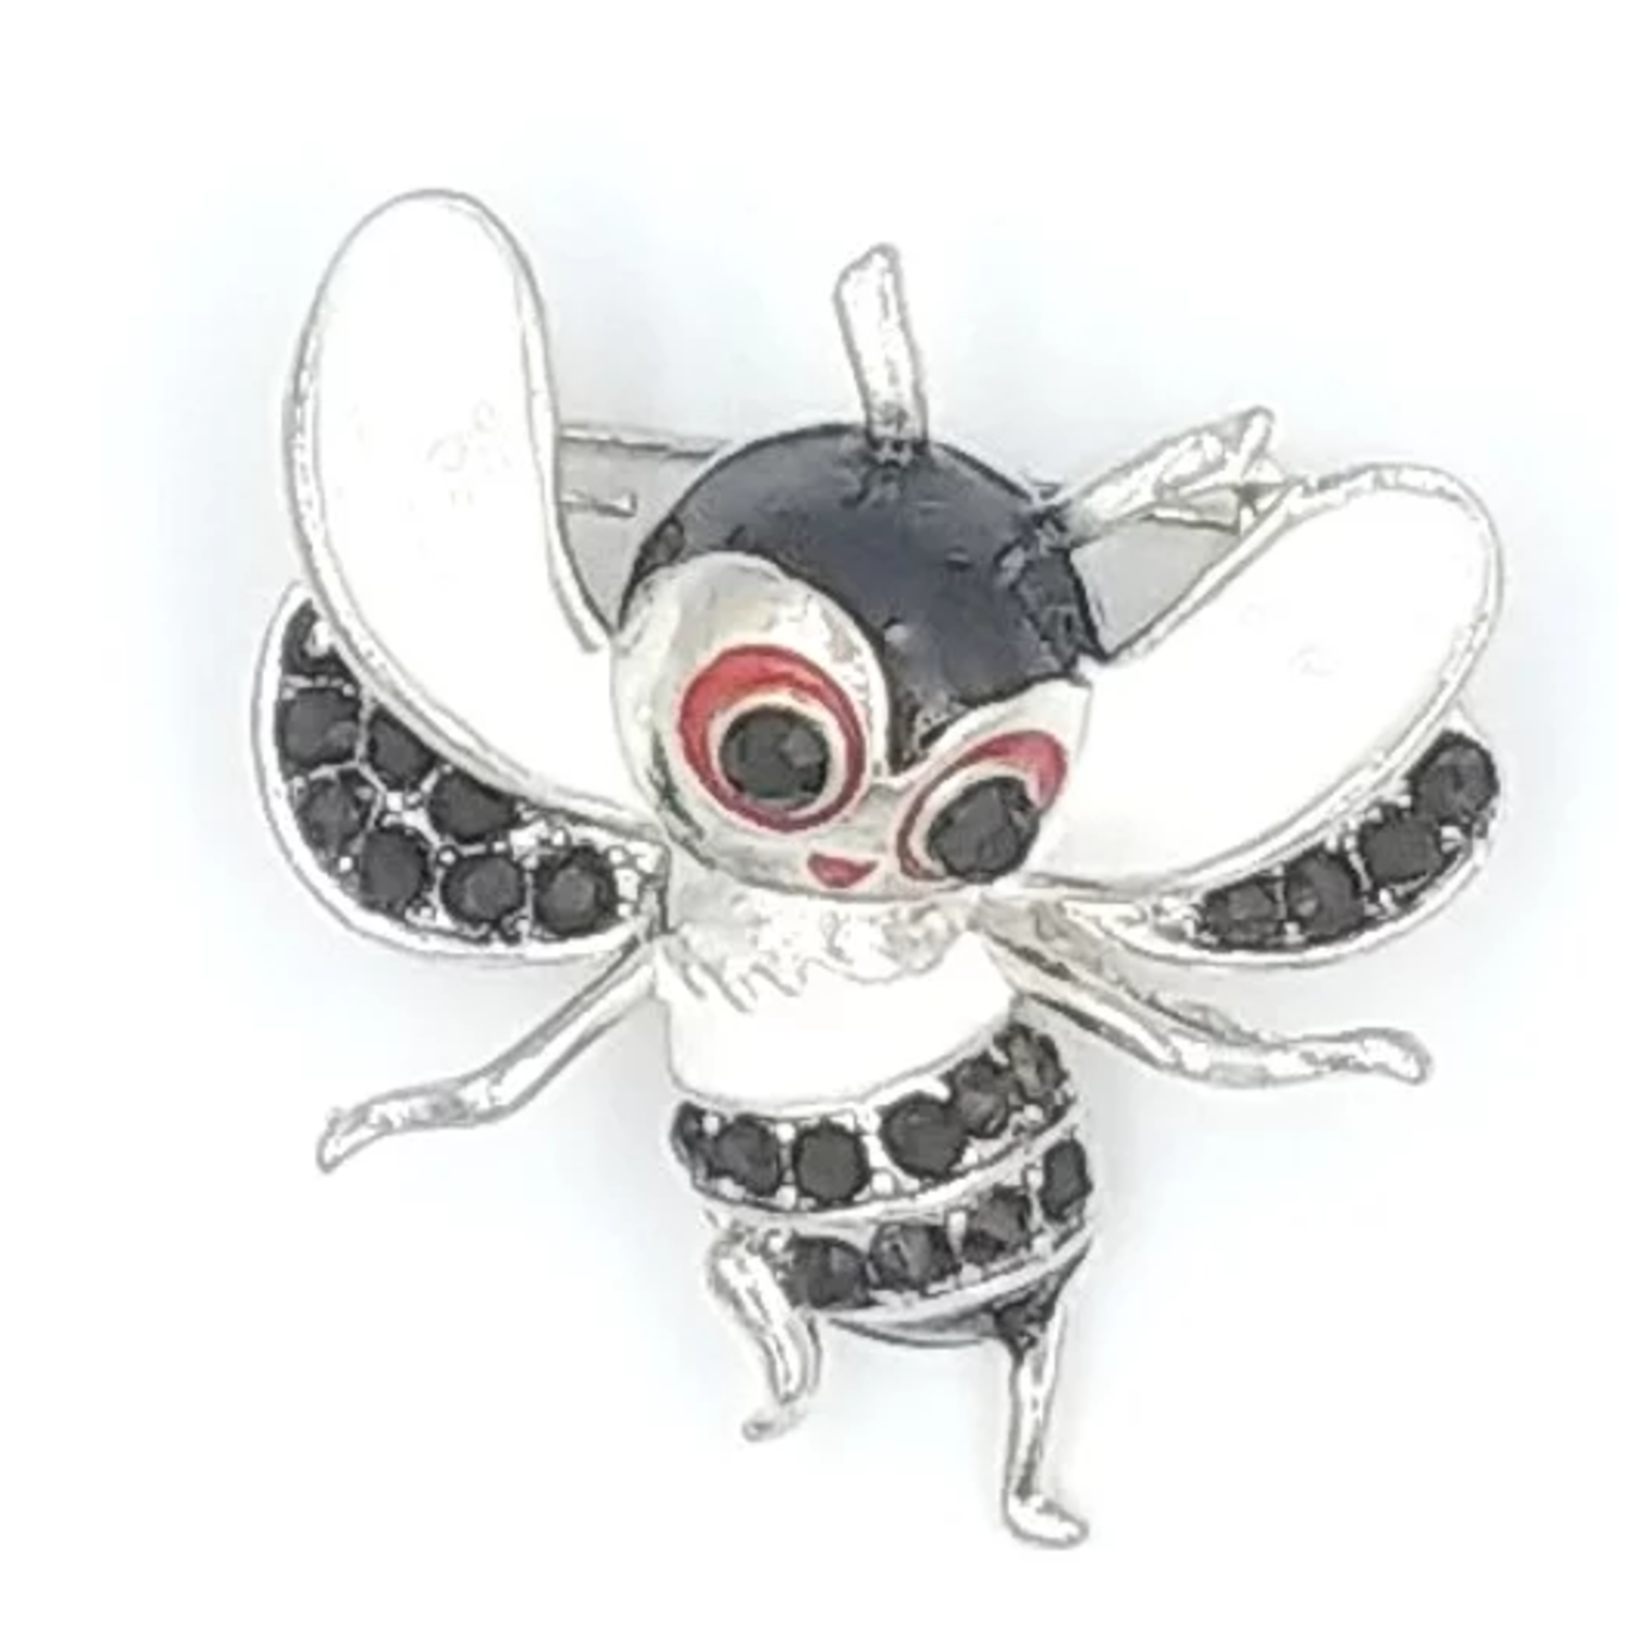 Silk Road Black & White Small Bumble Bee Brooch